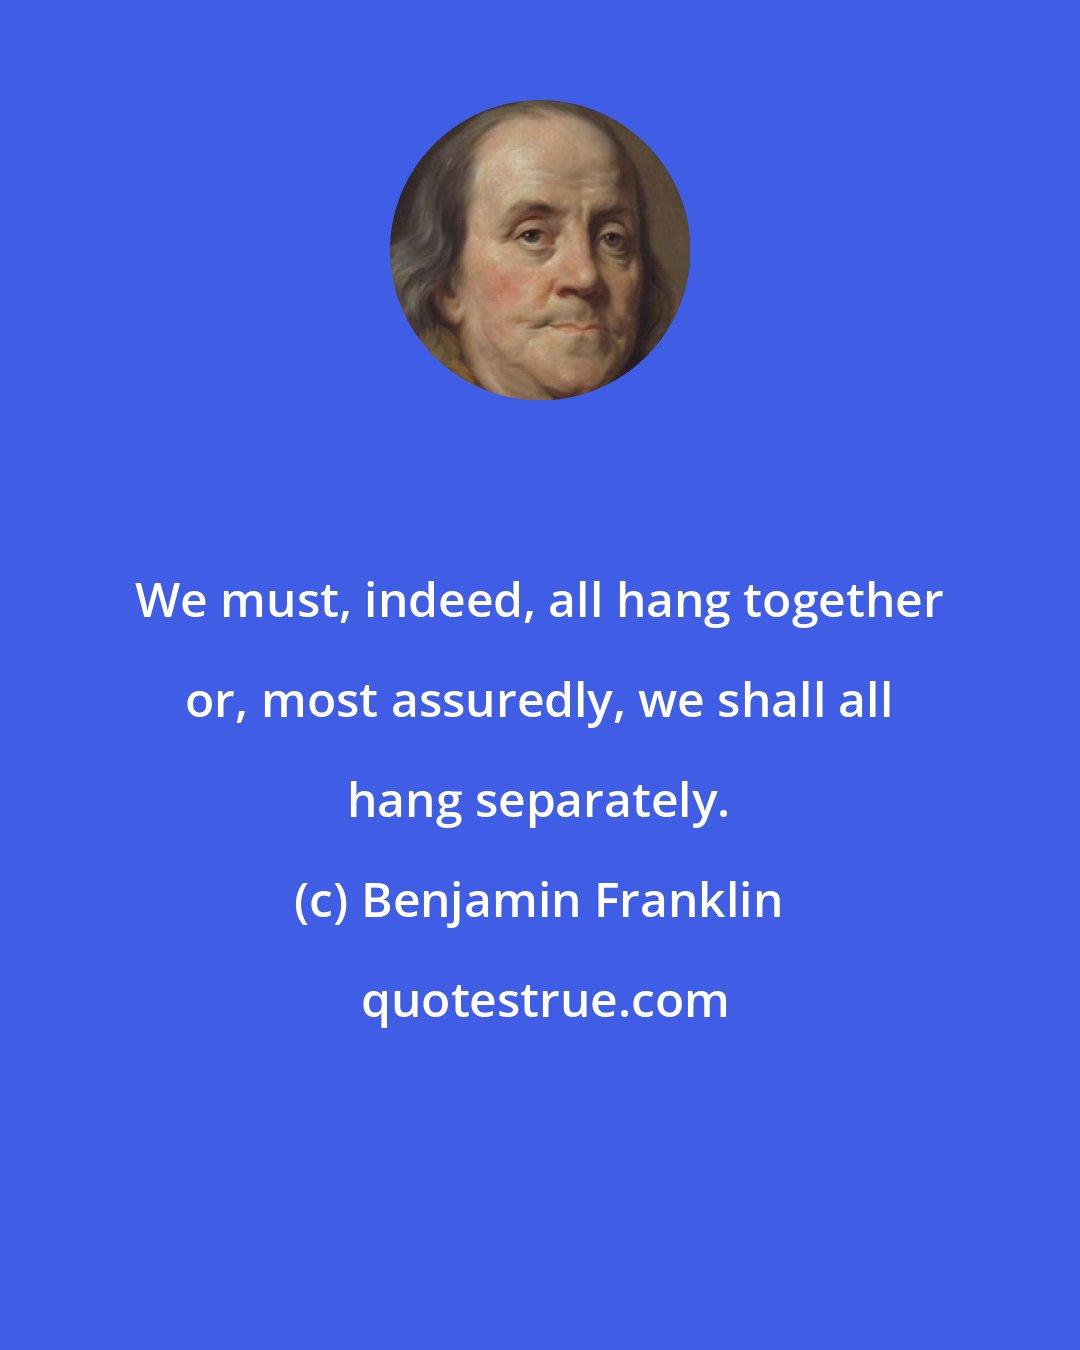 Benjamin Franklin: We must, indeed, all hang together or, most assuredly, we shall all hang separately.